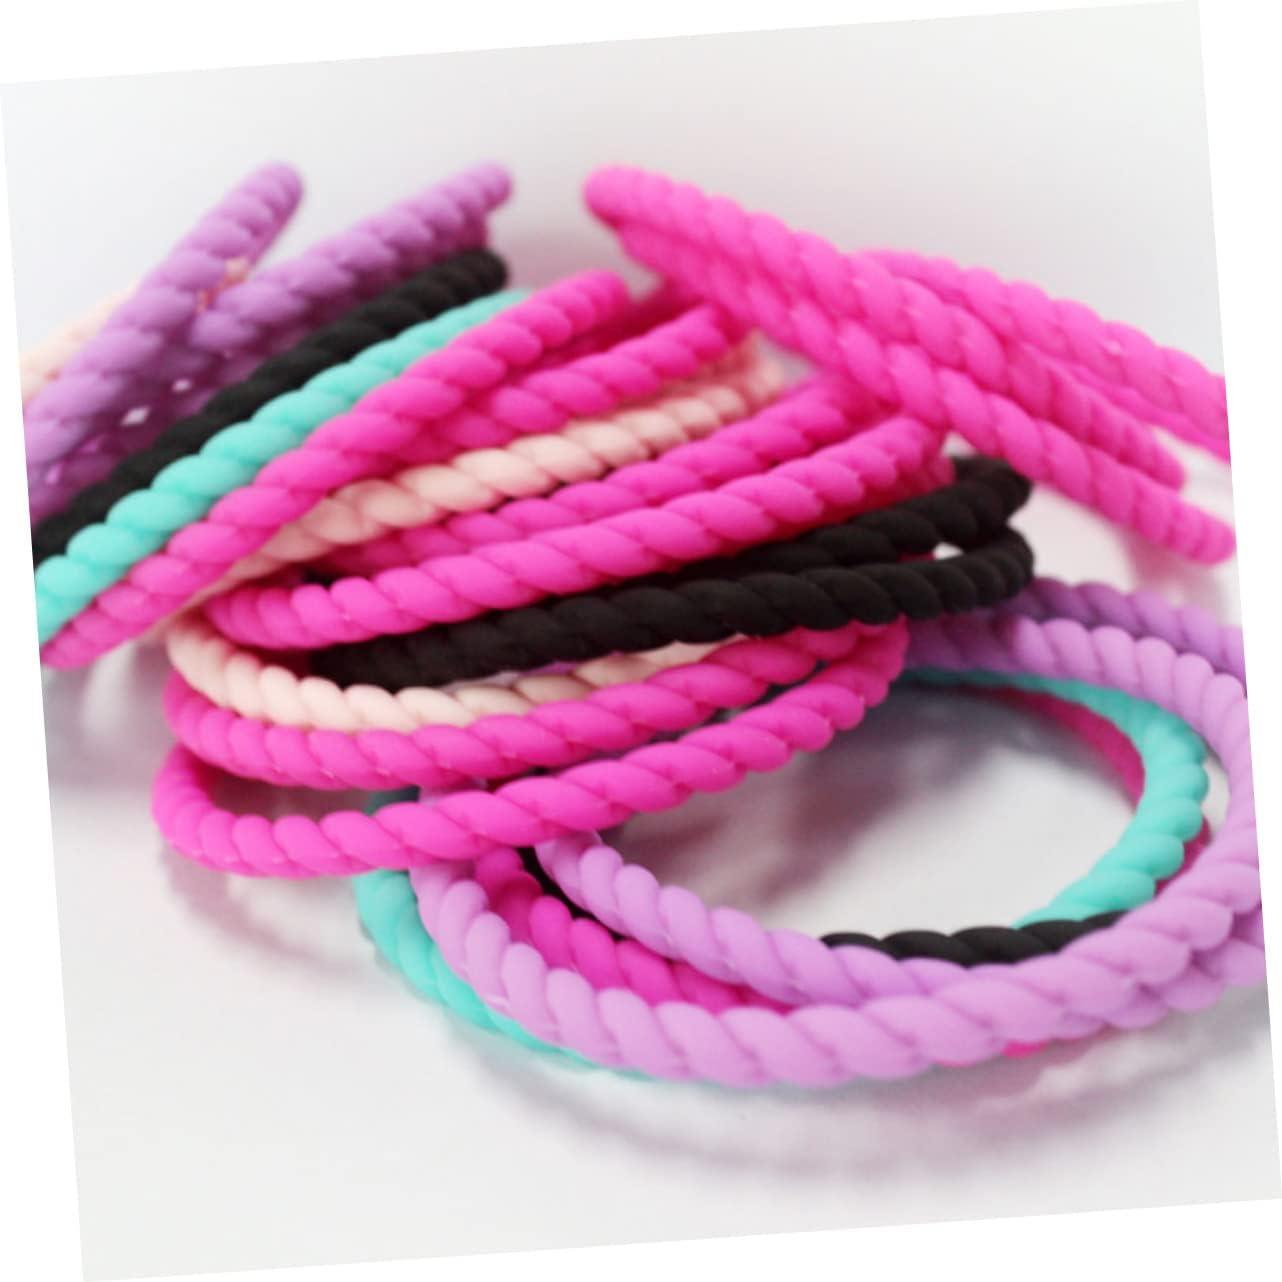 Rubber Bracelet for Men, Cool Wristband for Guys, Thin Mens Colored Silicone  Jewelry. 2mm